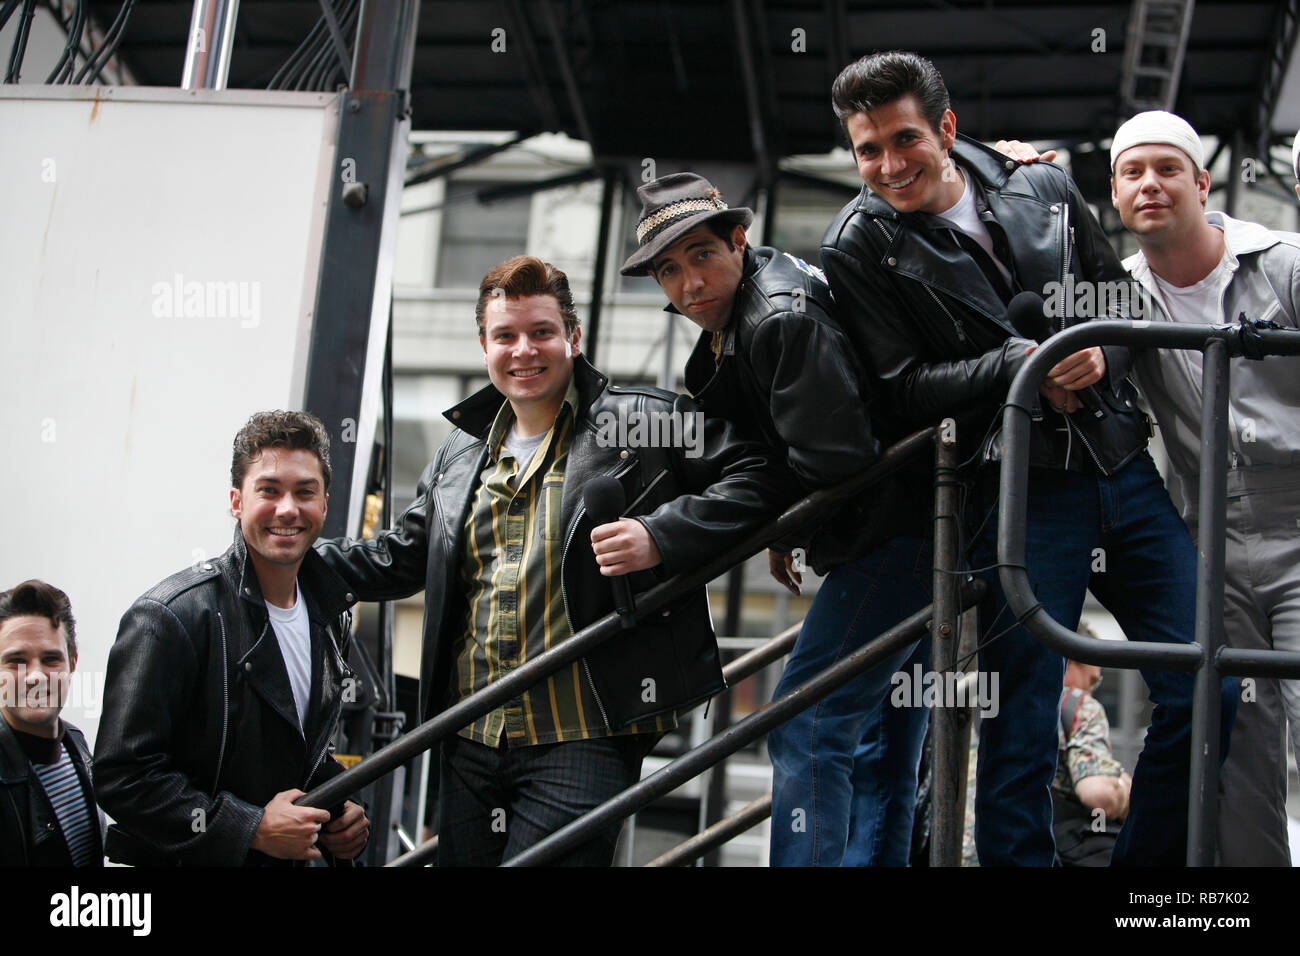 Ryan Patrick Binder & Ace Young & Keven Quillon, Jose Restrepo & Derek Keeling ( GREASE ) attending BROADWAY on BROADWAY 2008 in Times Square, New York City. September 14, 2008 Credit: Walter McBride/MediaPunch Stock Photo